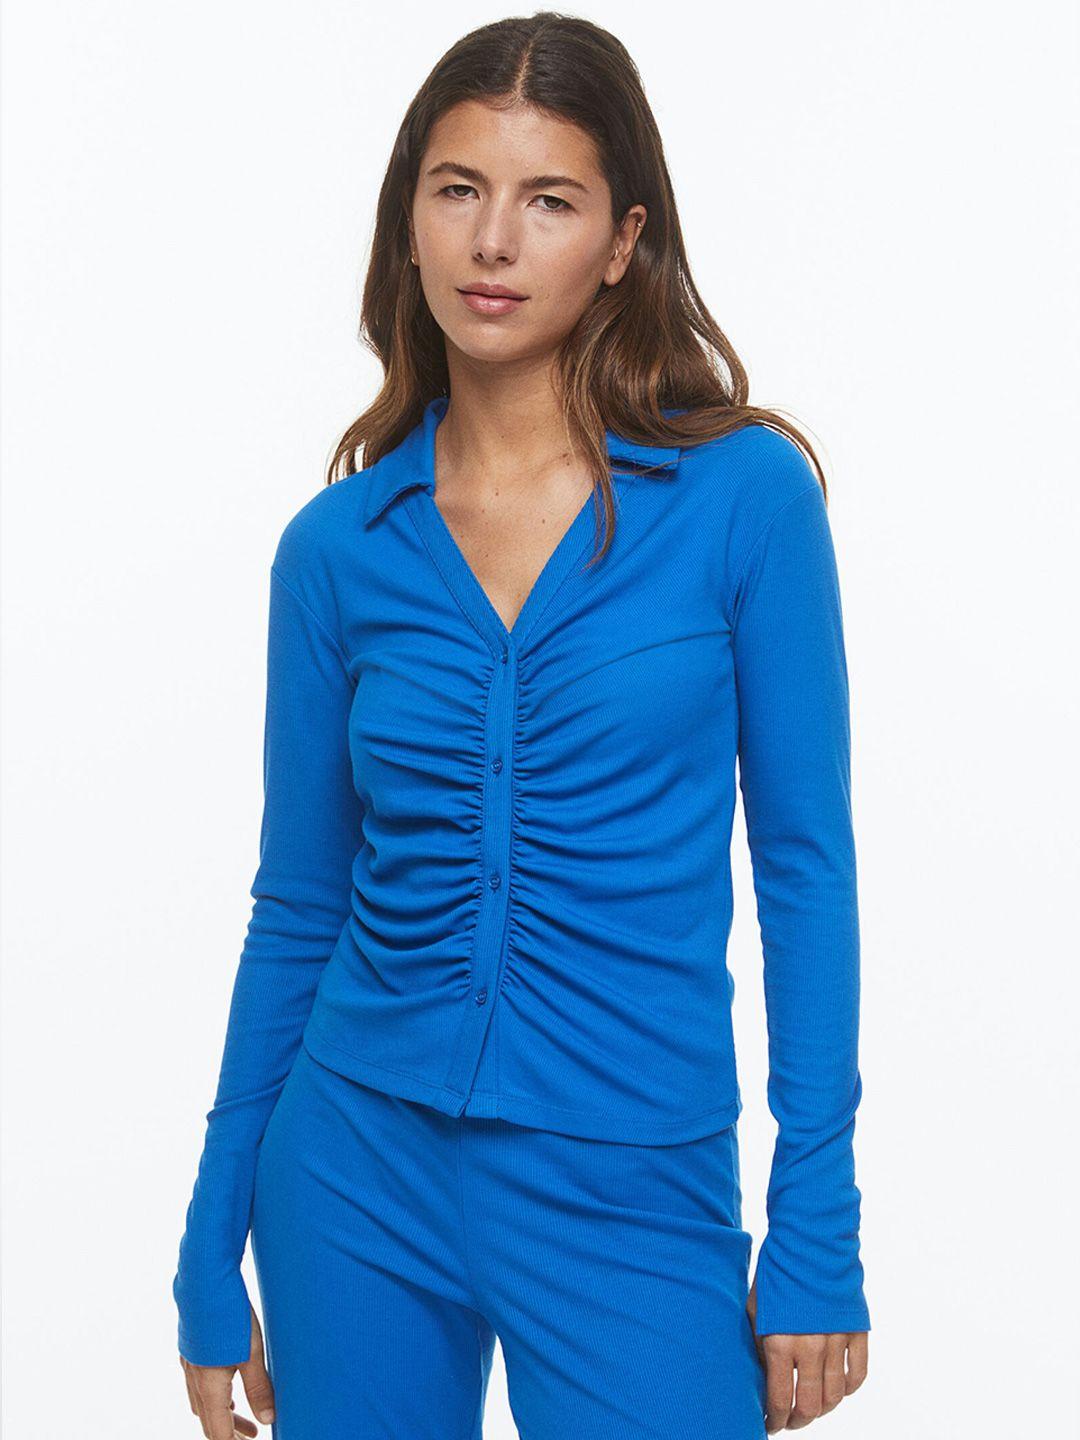 h&m women ribbed jersey top